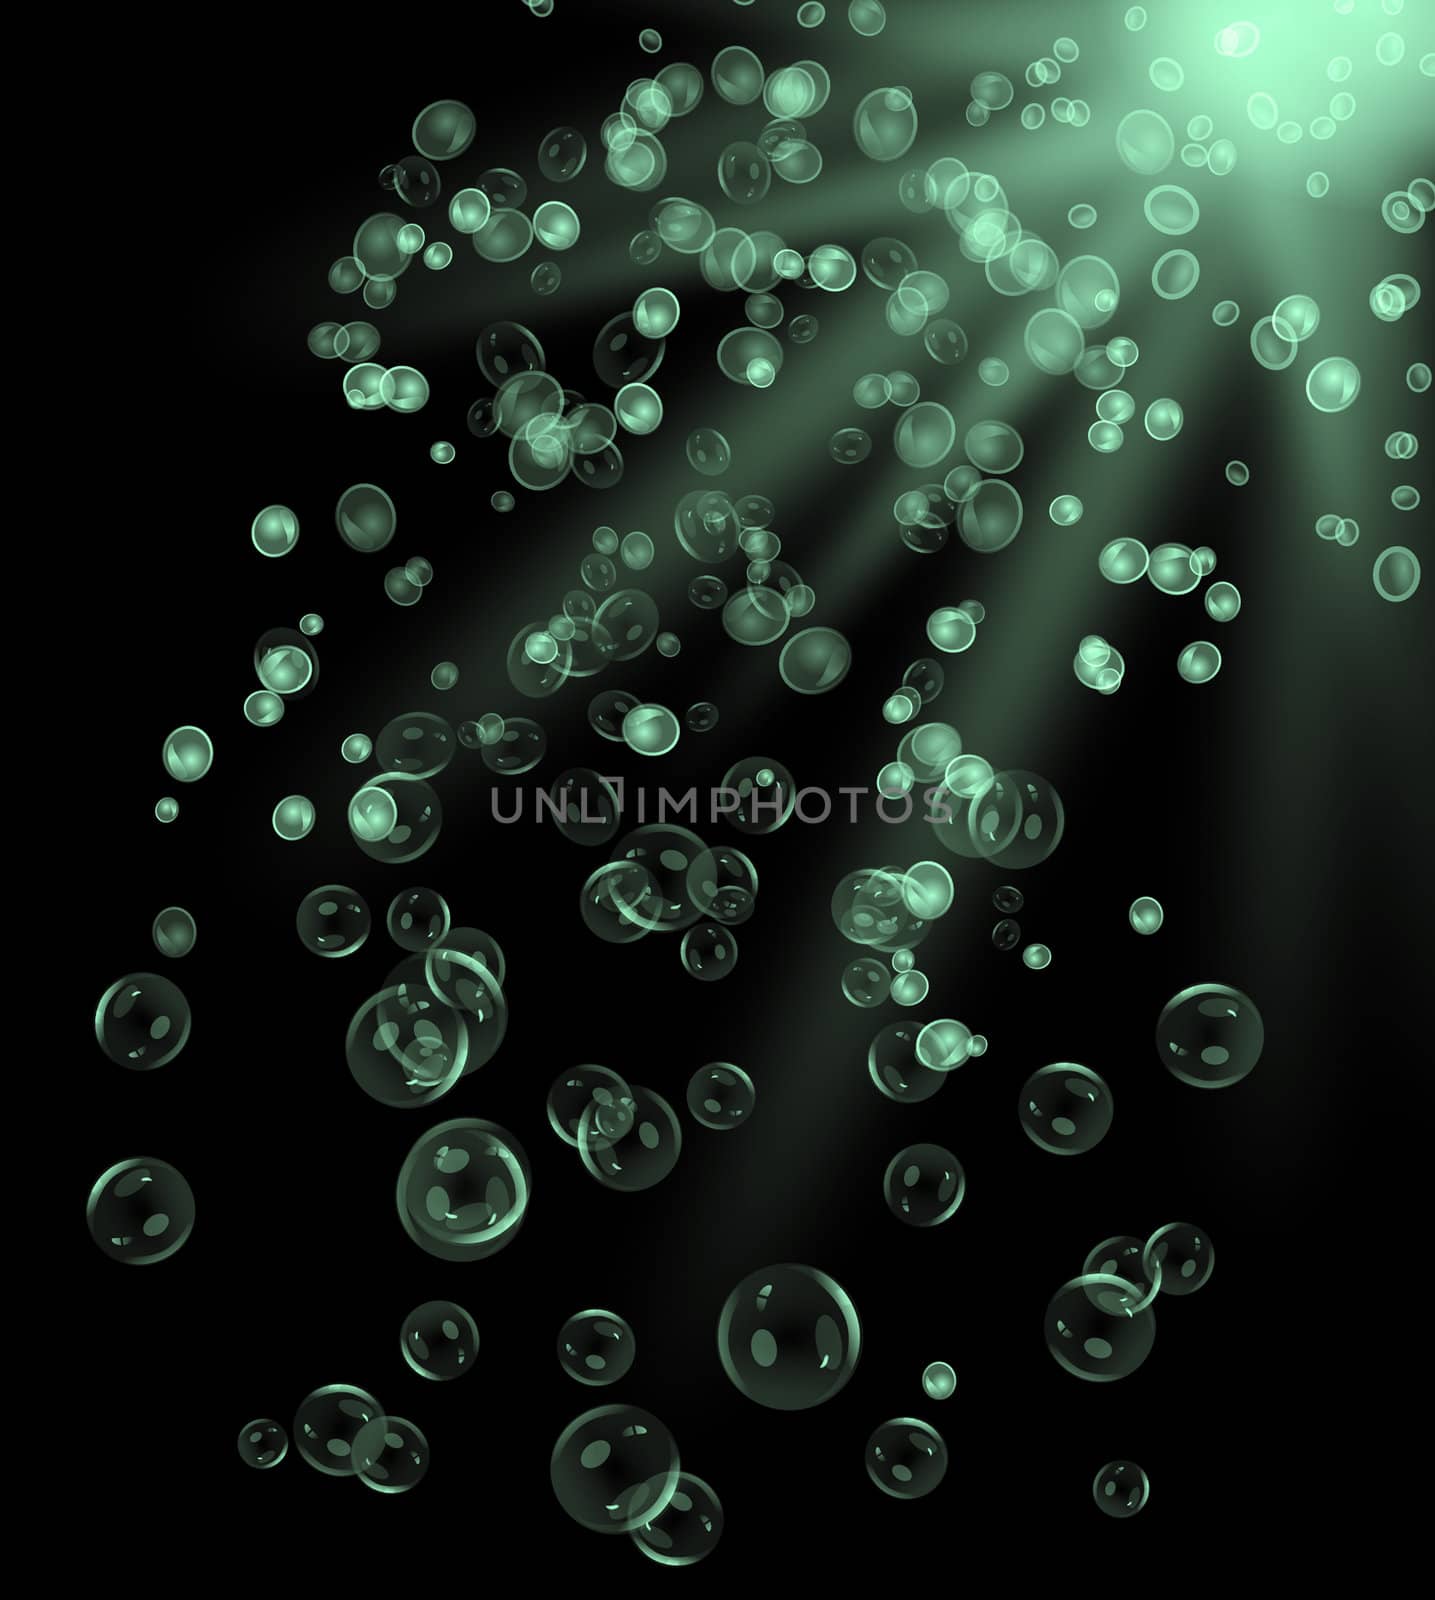 illustration depicting many green air bubbles rising from the depths of a black body of water towards the surface.